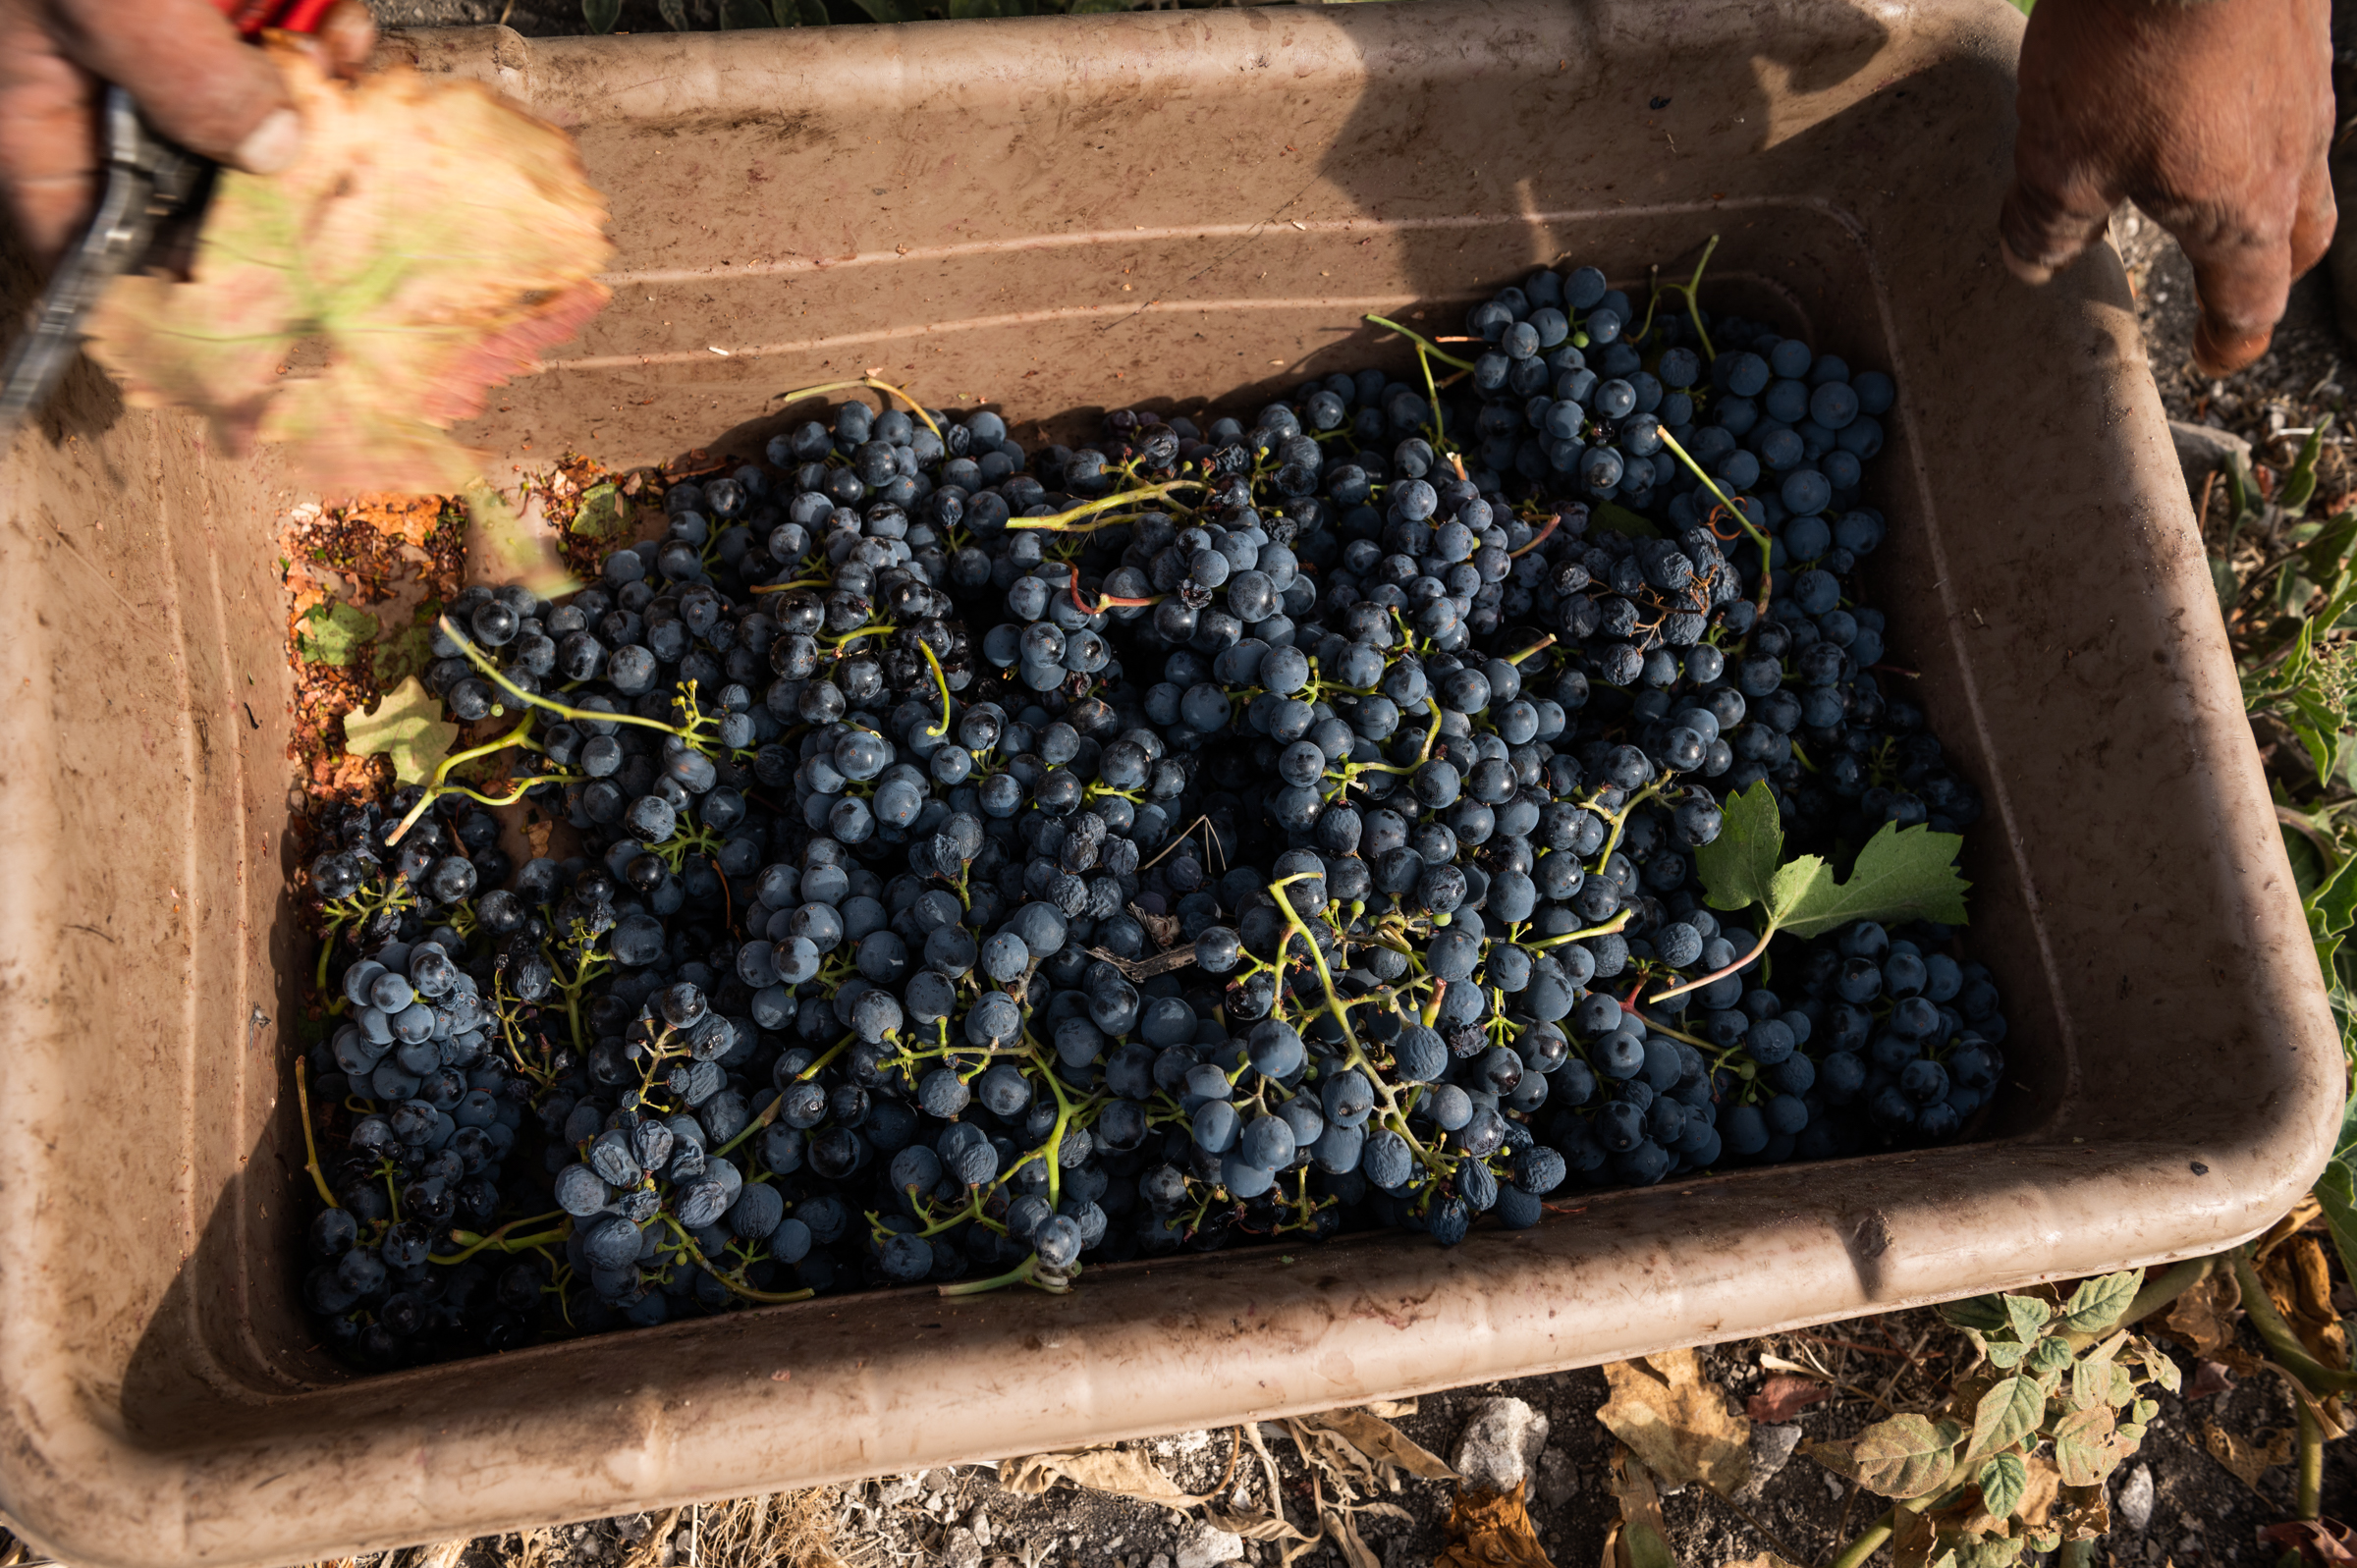 Wine grapes are cut by hand and placed in a bin during harvest